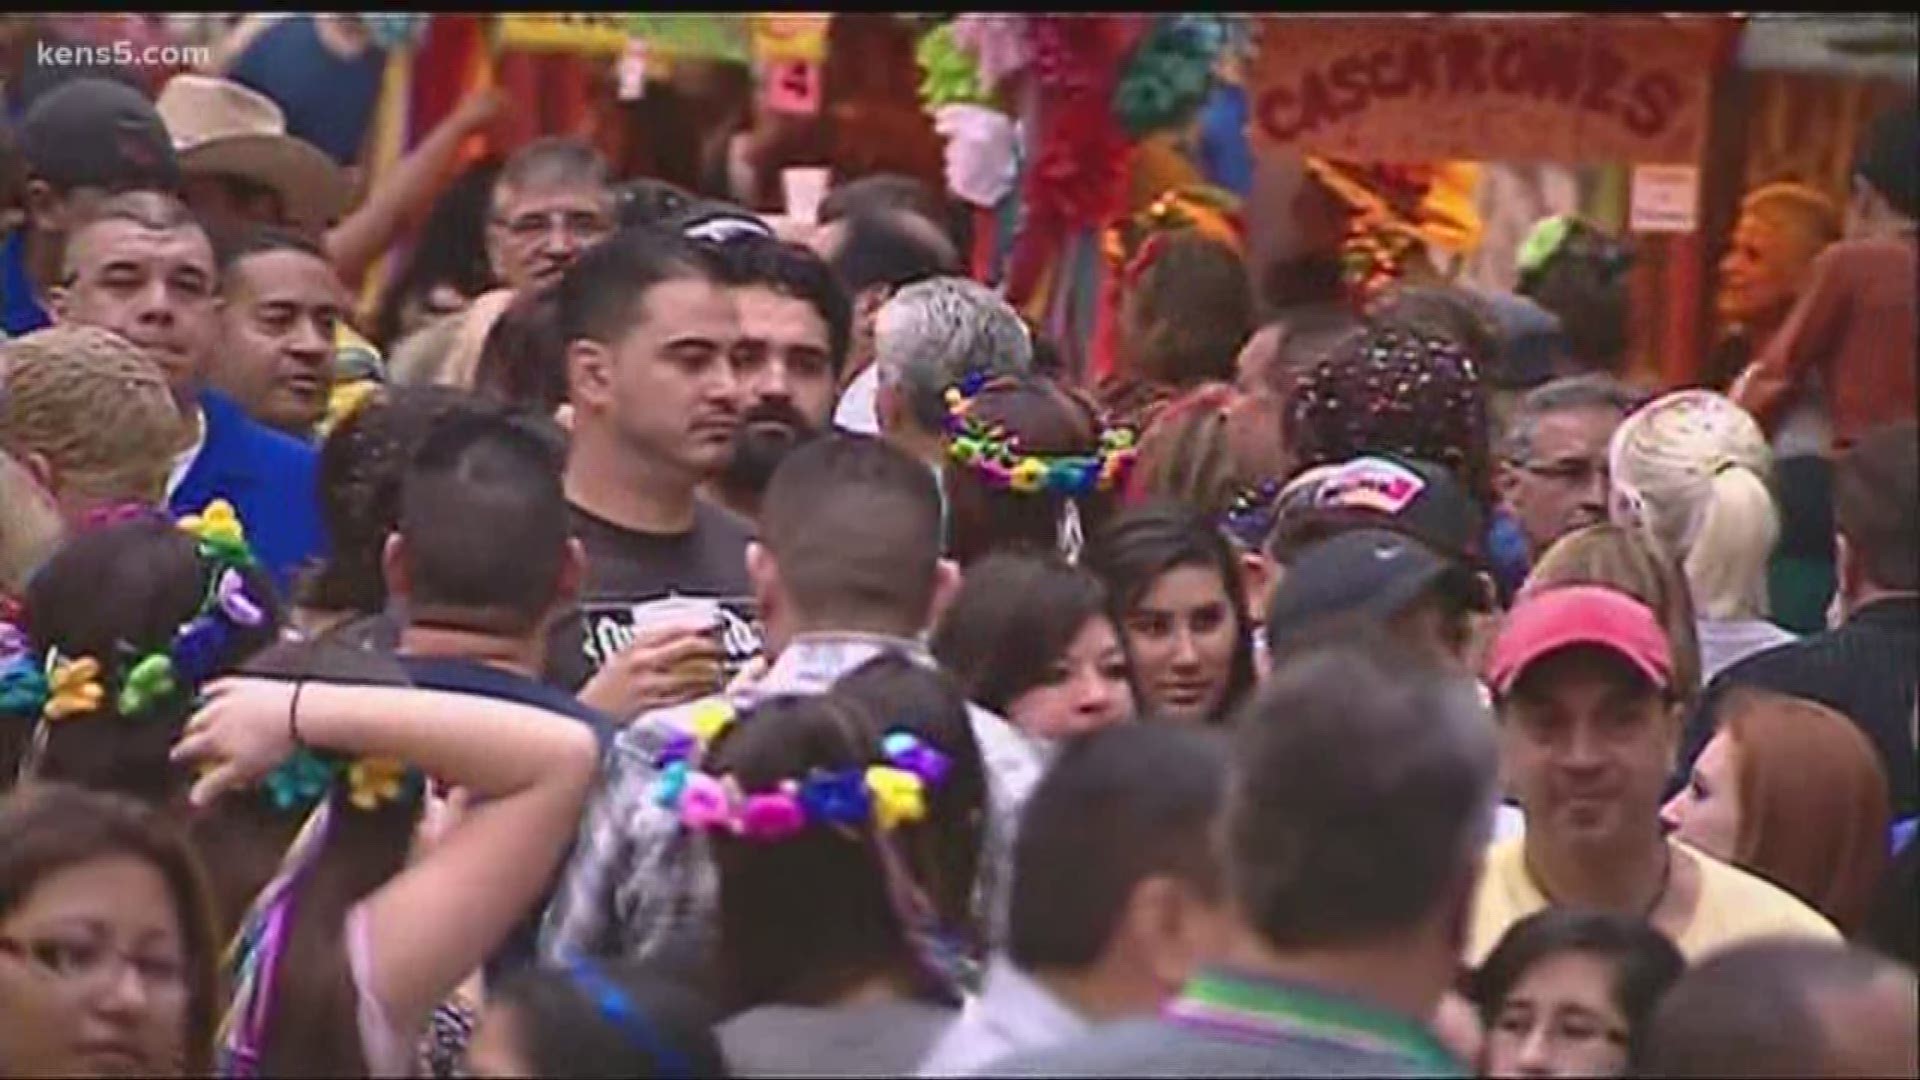 As of now, organizers of San Antonio's biggest annual party say nothing has changed.